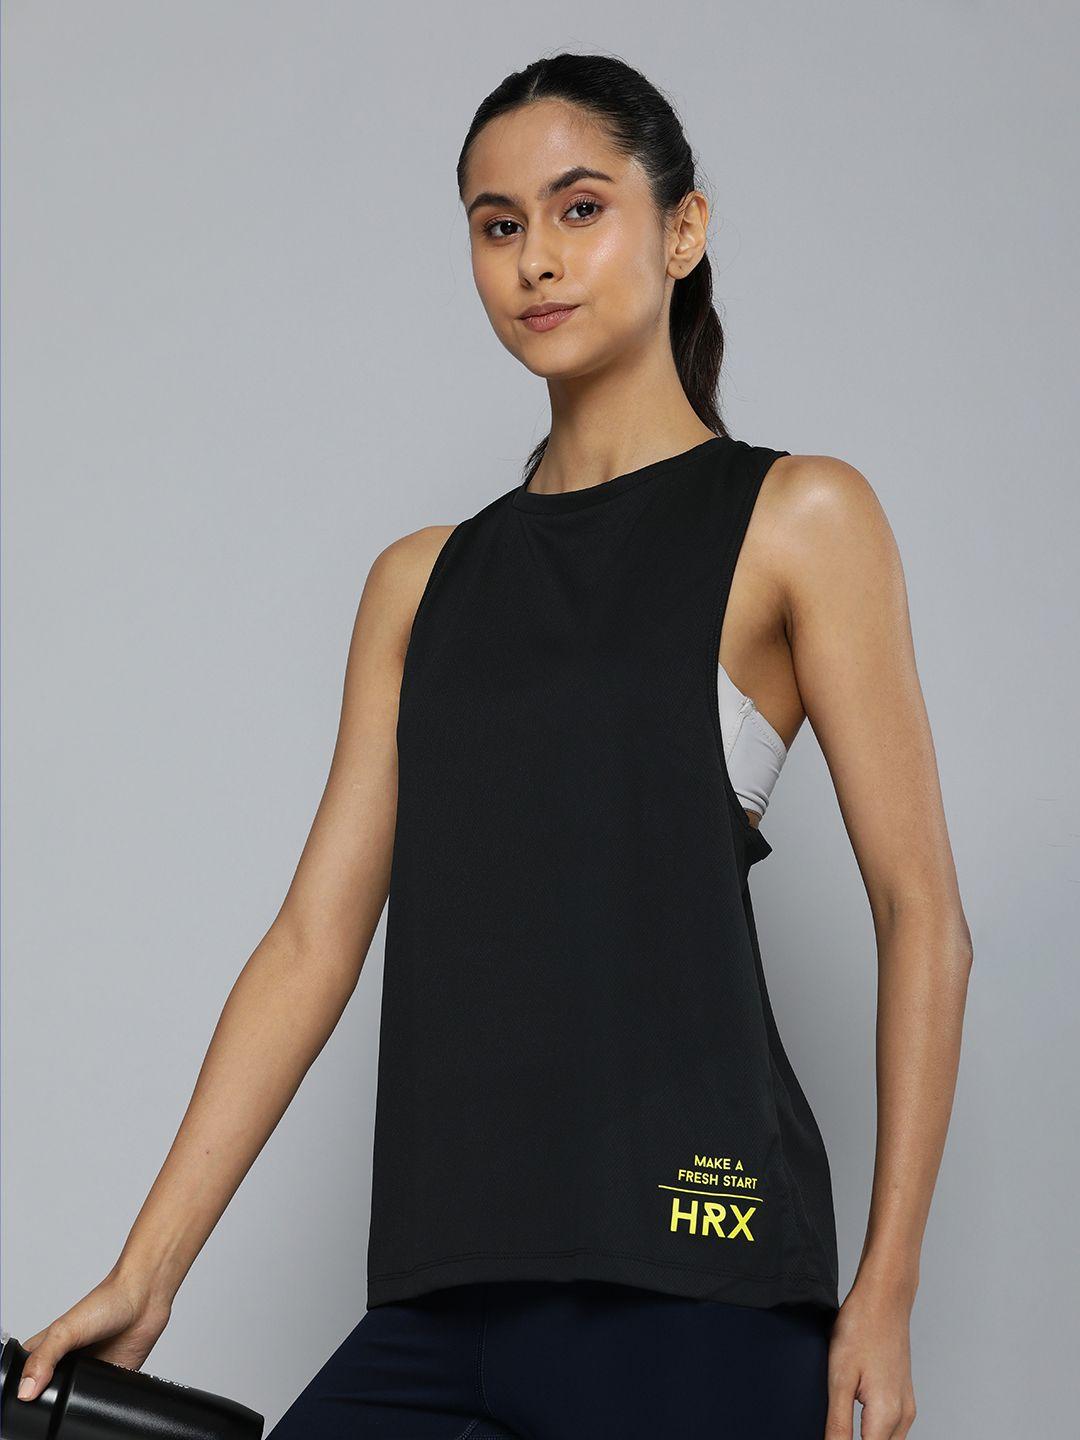 hrx by hrithik roshan round neck rapid-dry anti-microbial running tank top